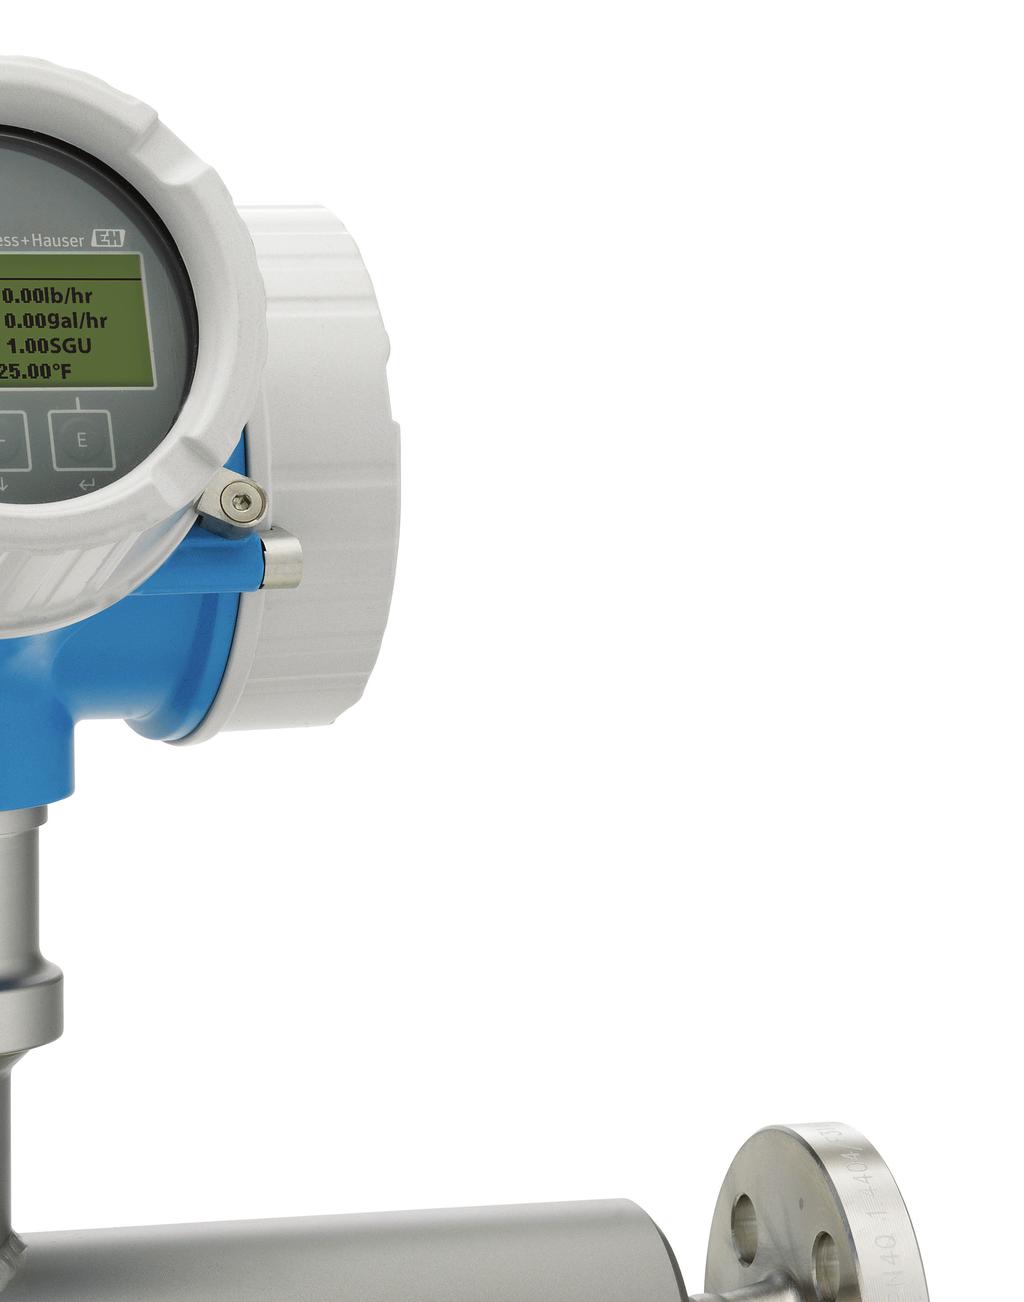 Two-wire Coriolis measurement 3 Easy operation Time-saving device configuration with the uniform Endress+Hauser operating concept Guided menu with make-it-run wizards Integrated help function (Tool